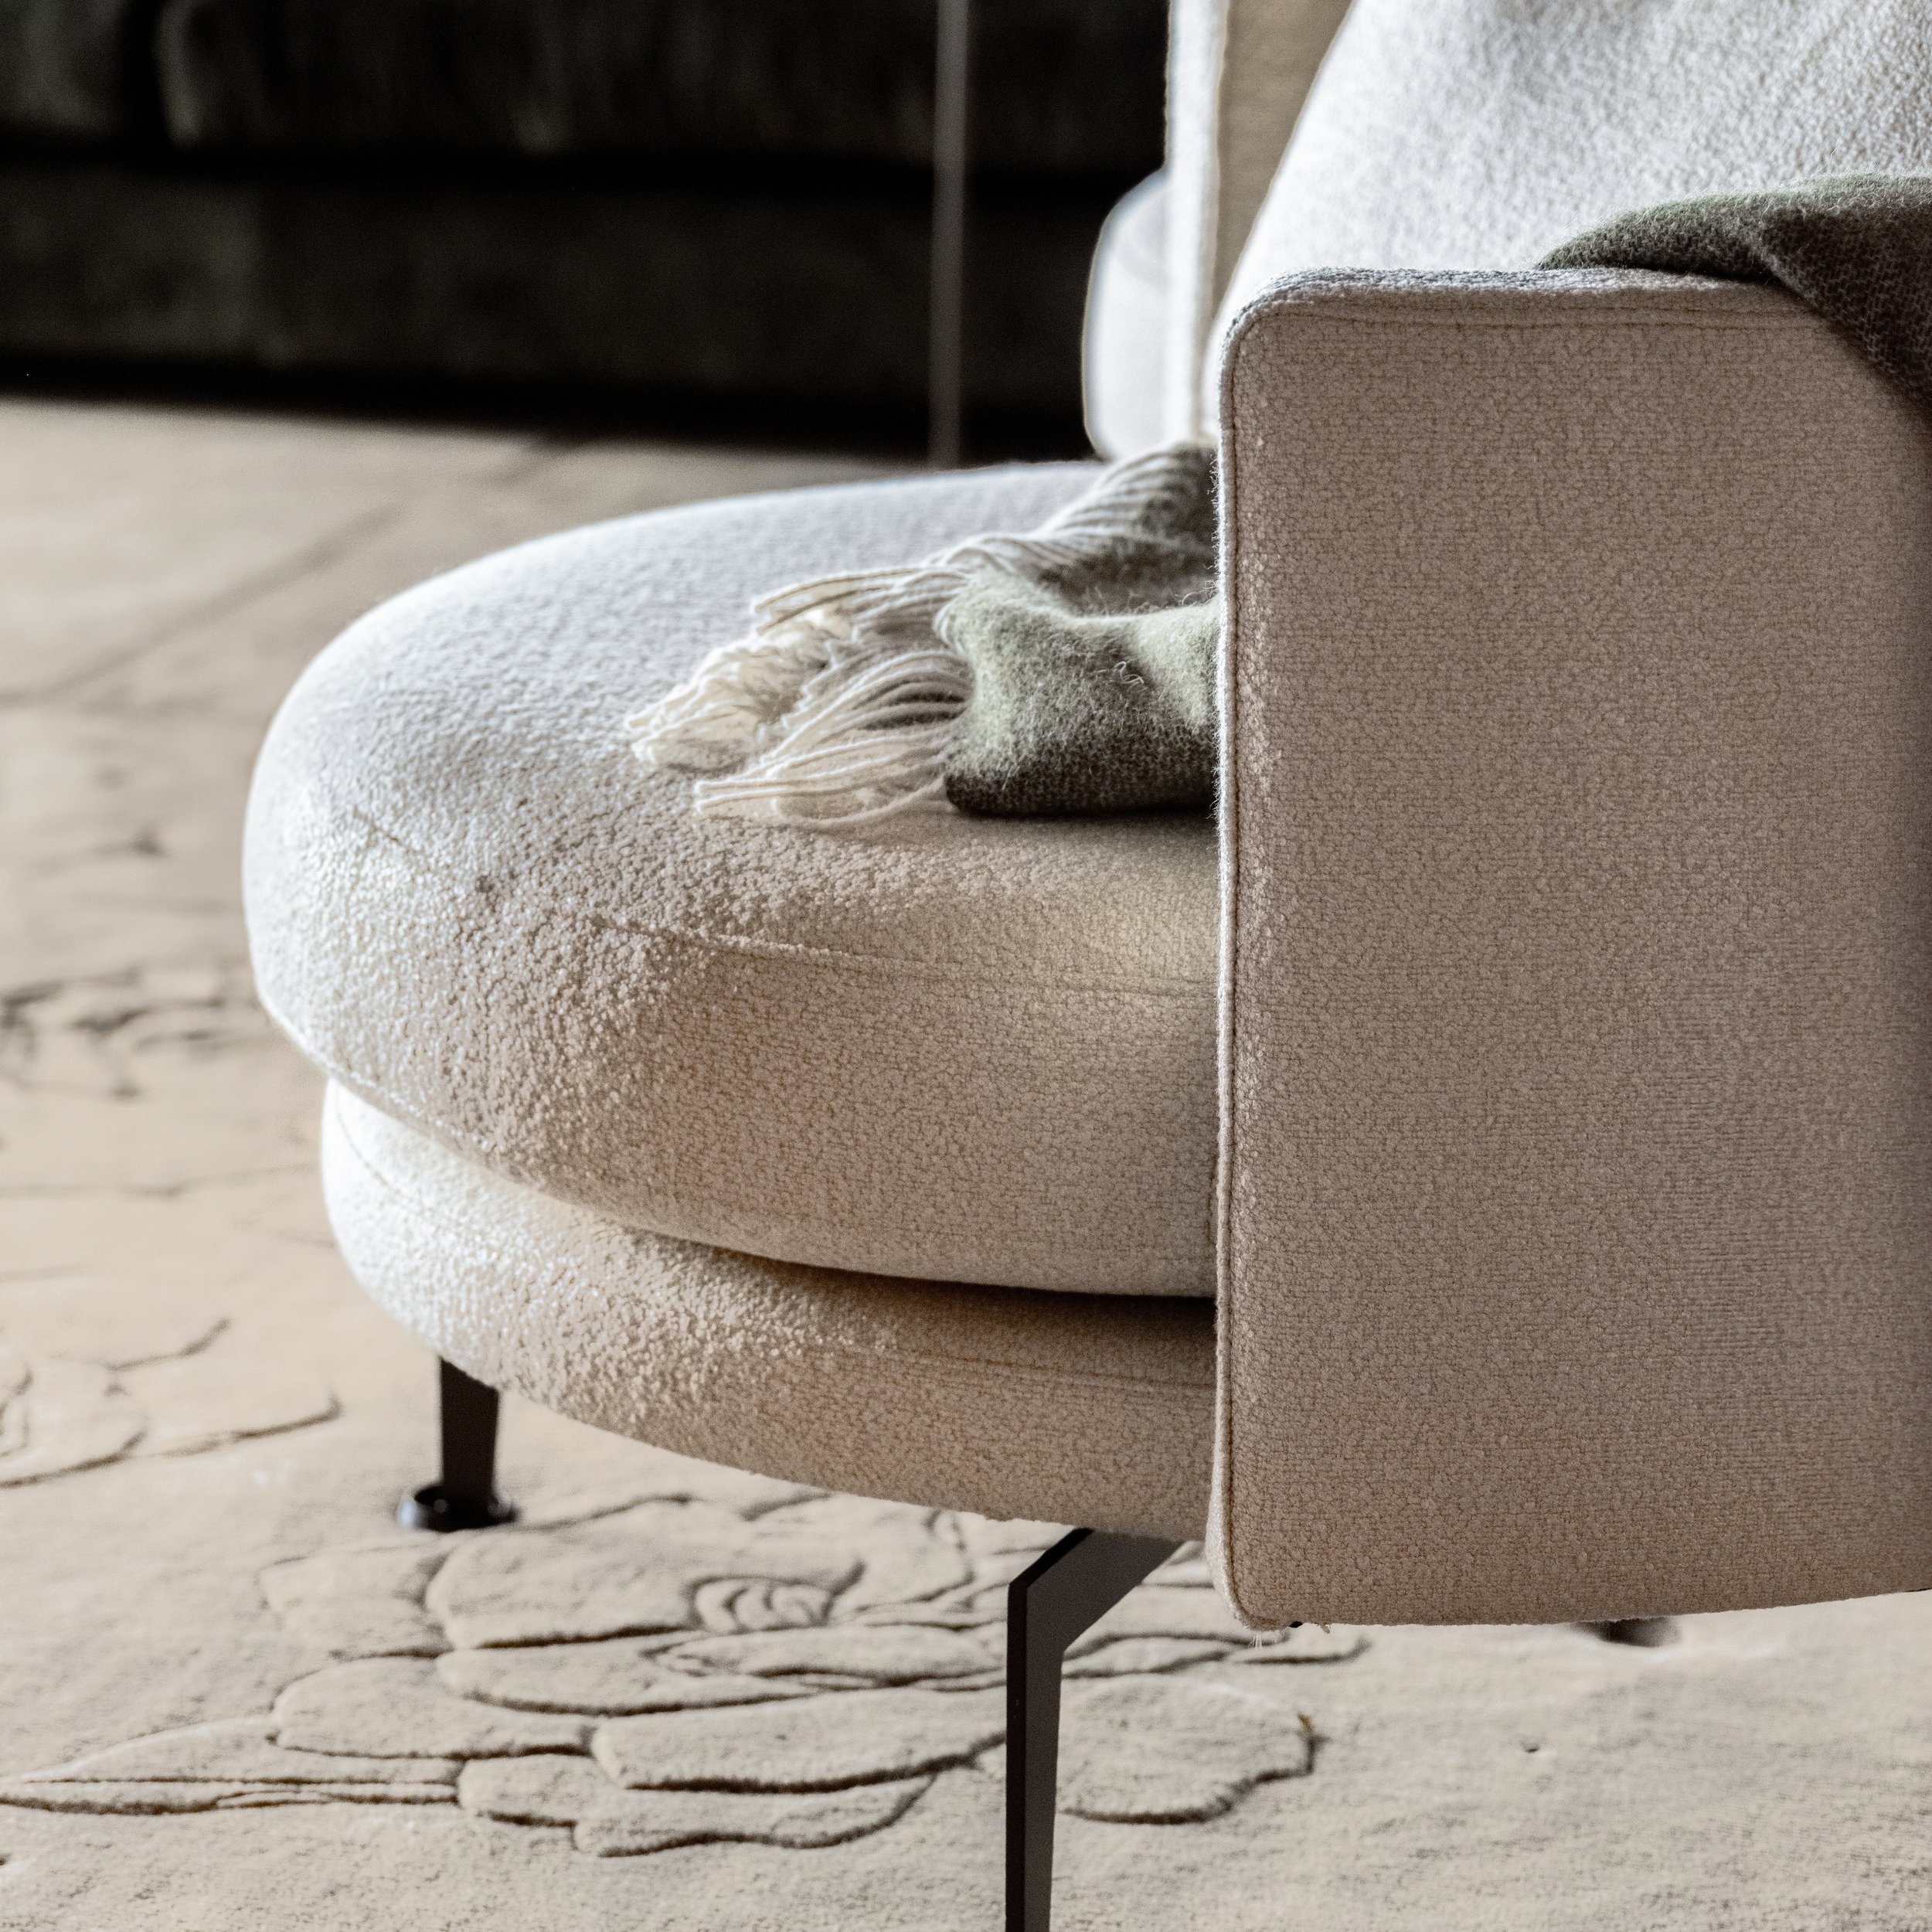 Every detail was thought out meticulously for Project | Clevedon. From the custom hand-carved rug to the designer boucle armchairs. Creating an inviting and texture rich lounge to relax in. 

#interiordesign #interiortrends #boucle #customfurniture #